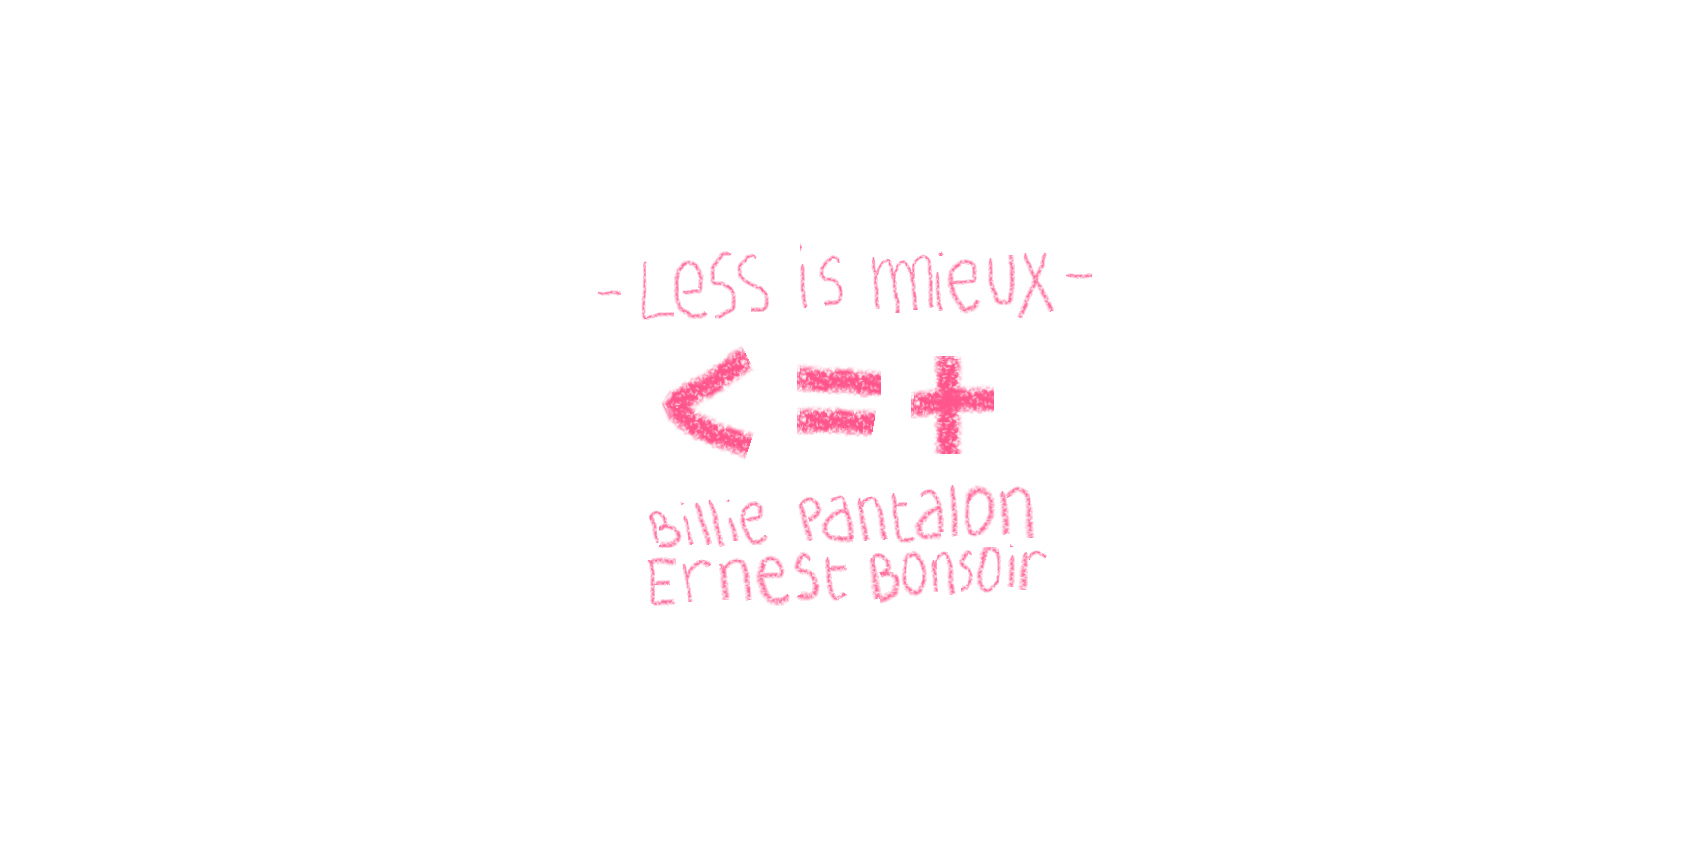 less is mieux illustration